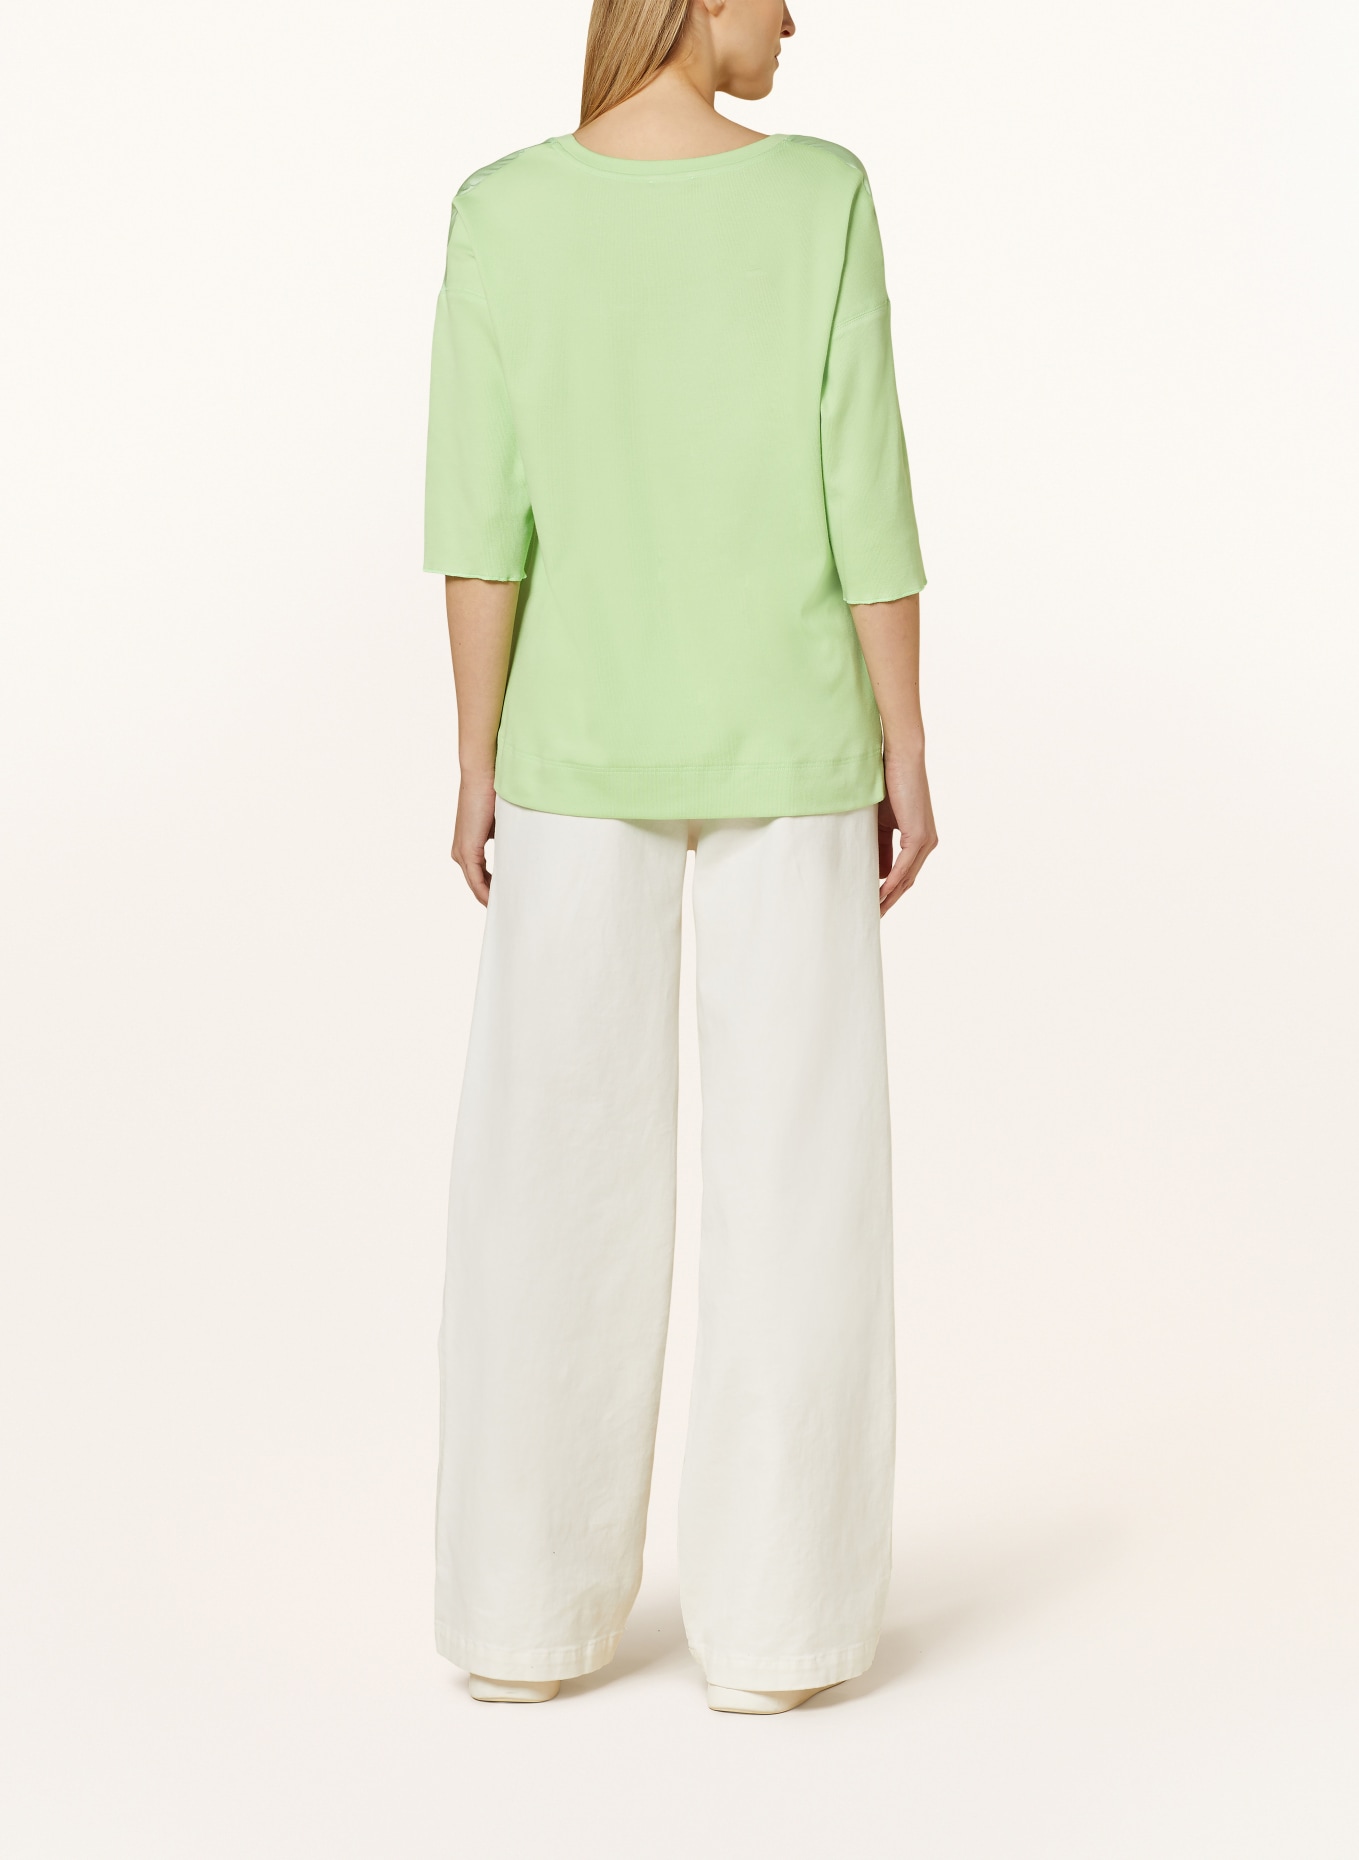 MARC CAIN Shirt blouse in mixed materials, Color: 531 light apple green (Image 3)